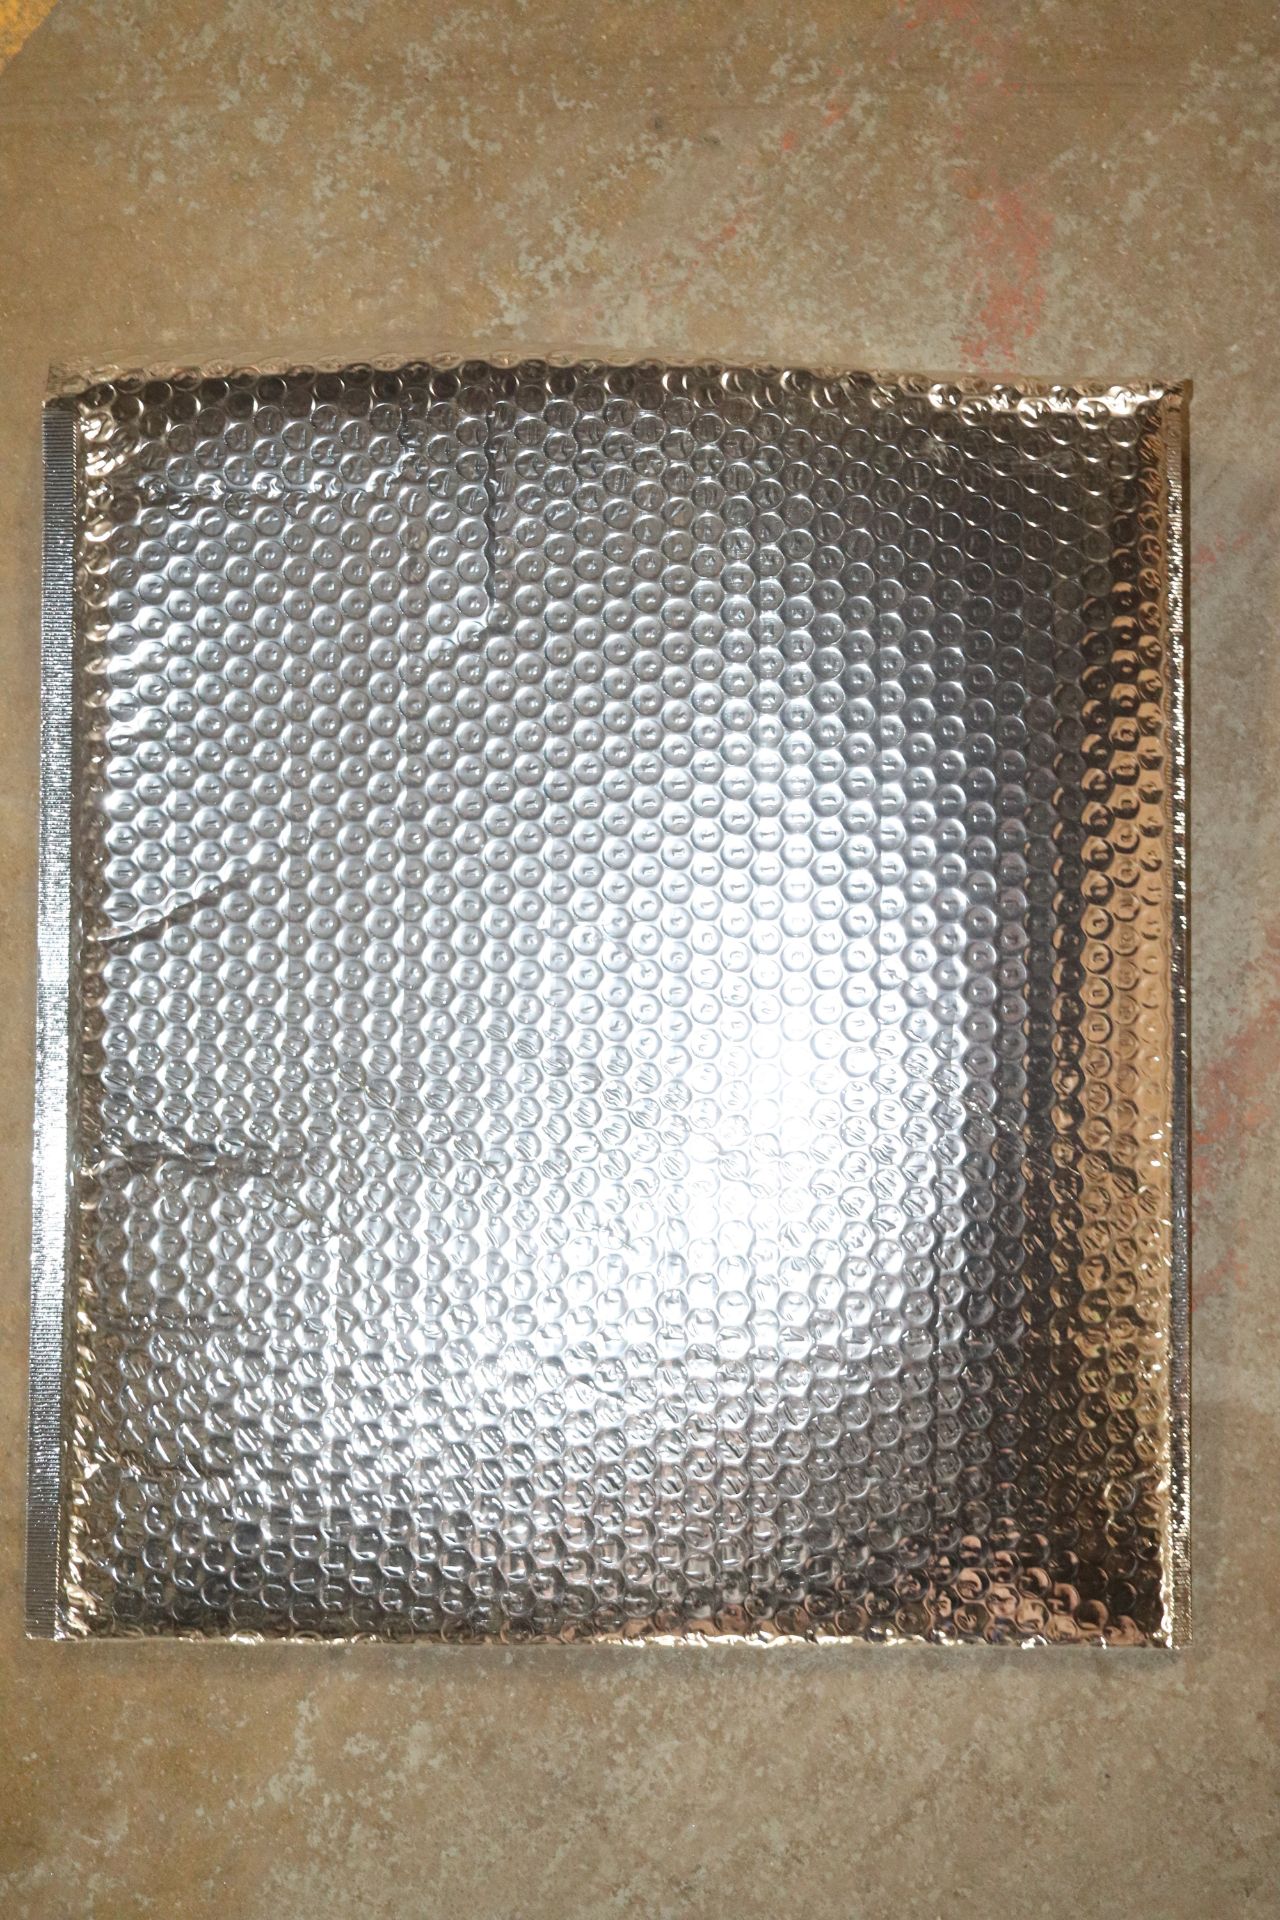 Four cases of metallic bubble mailers, 15" x 17", 50 per case - Image 2 of 2